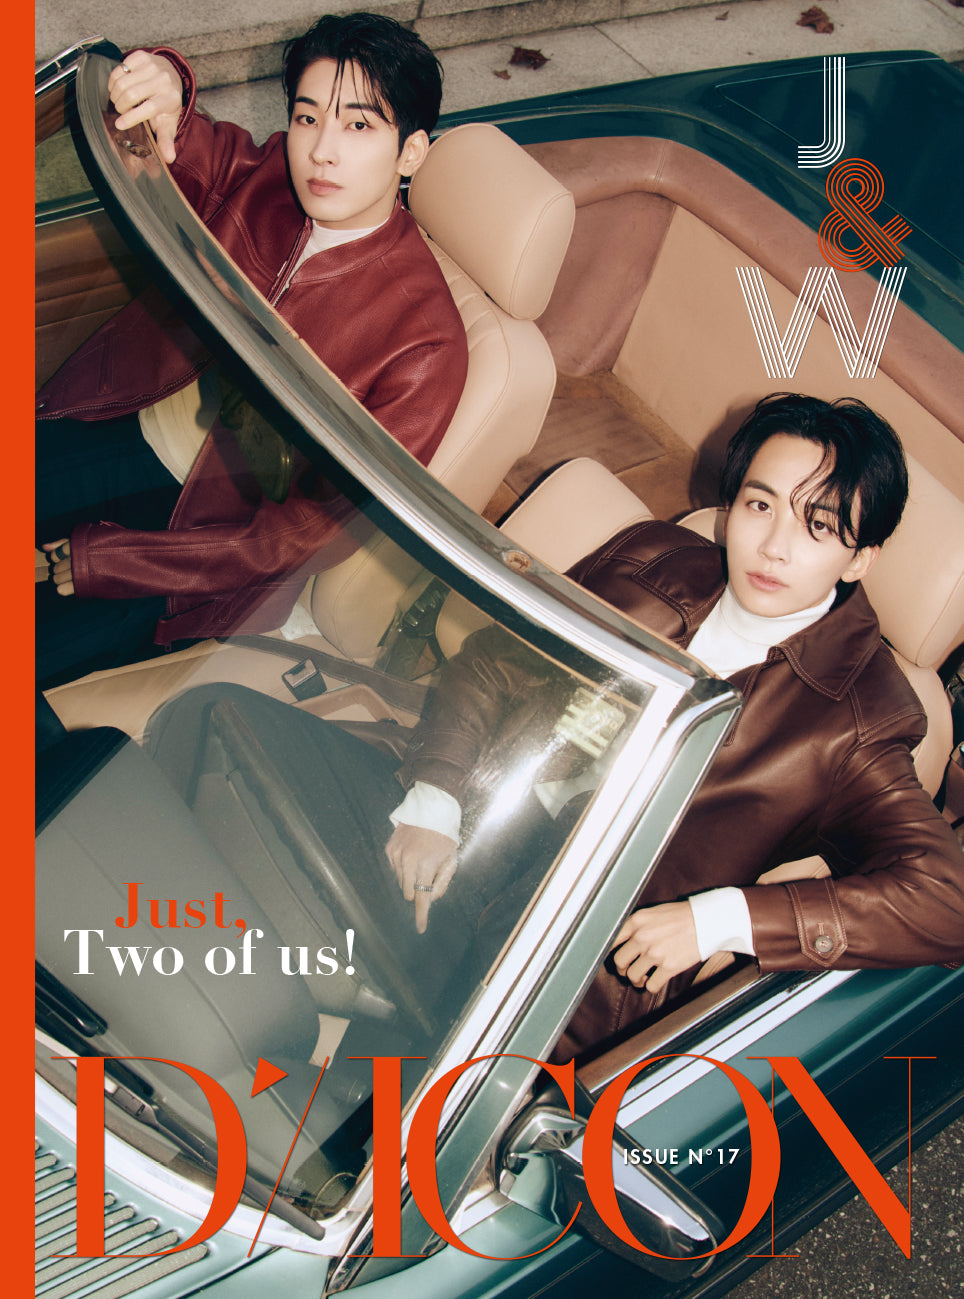 [Magazine] DICON ISSUE N°17 JEONGHAN, WONWOO : Just, Two of us!